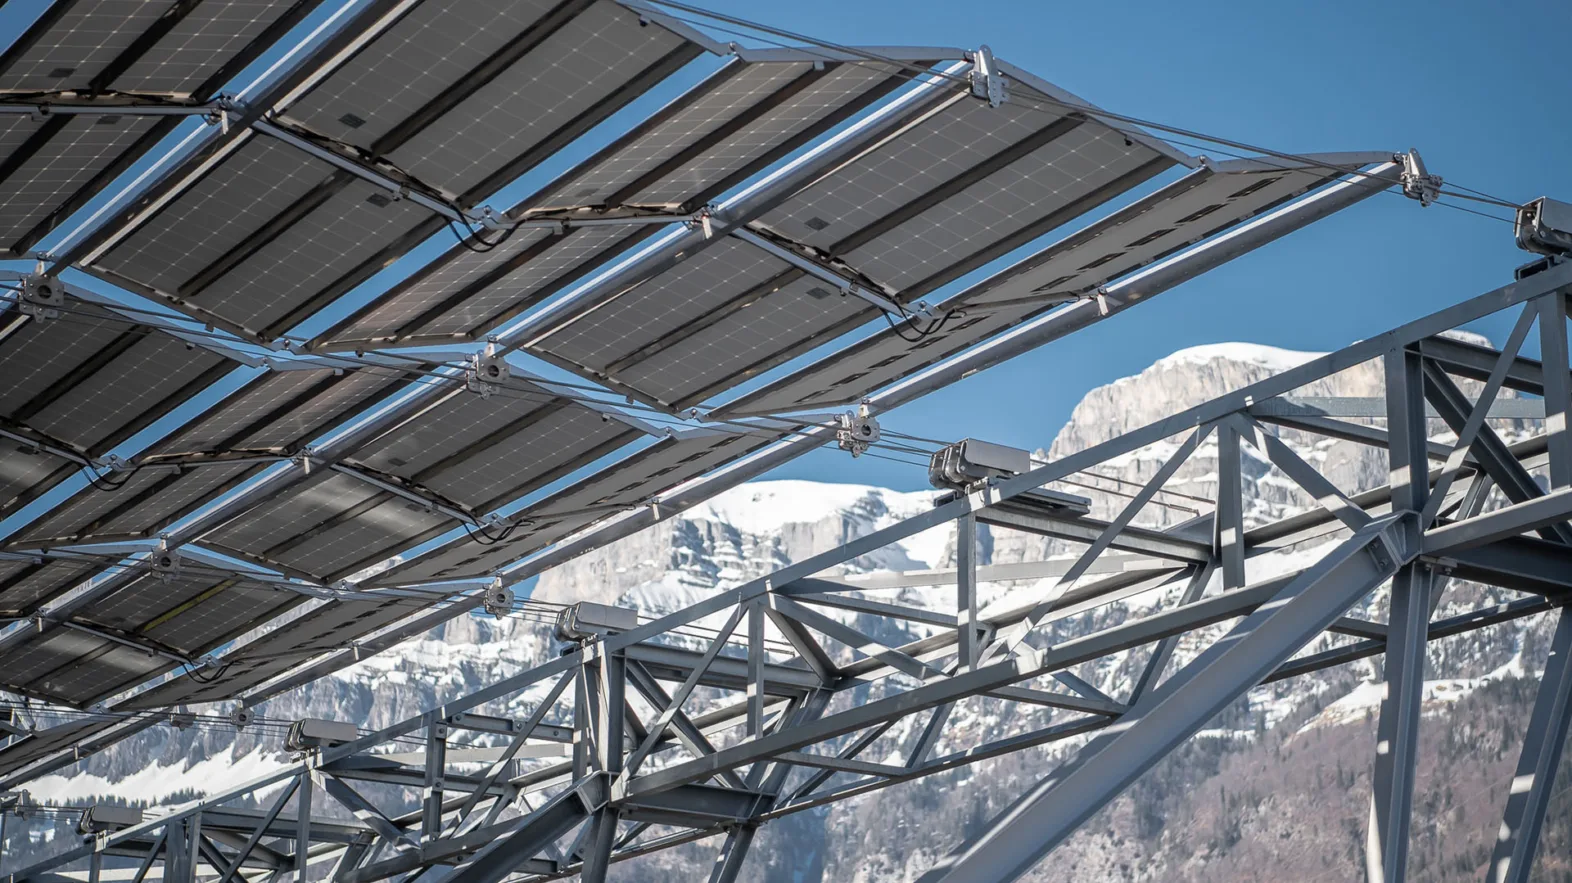 Foldable solar panels against a backdrop of snowy alps and a blue sky on a sunny day.